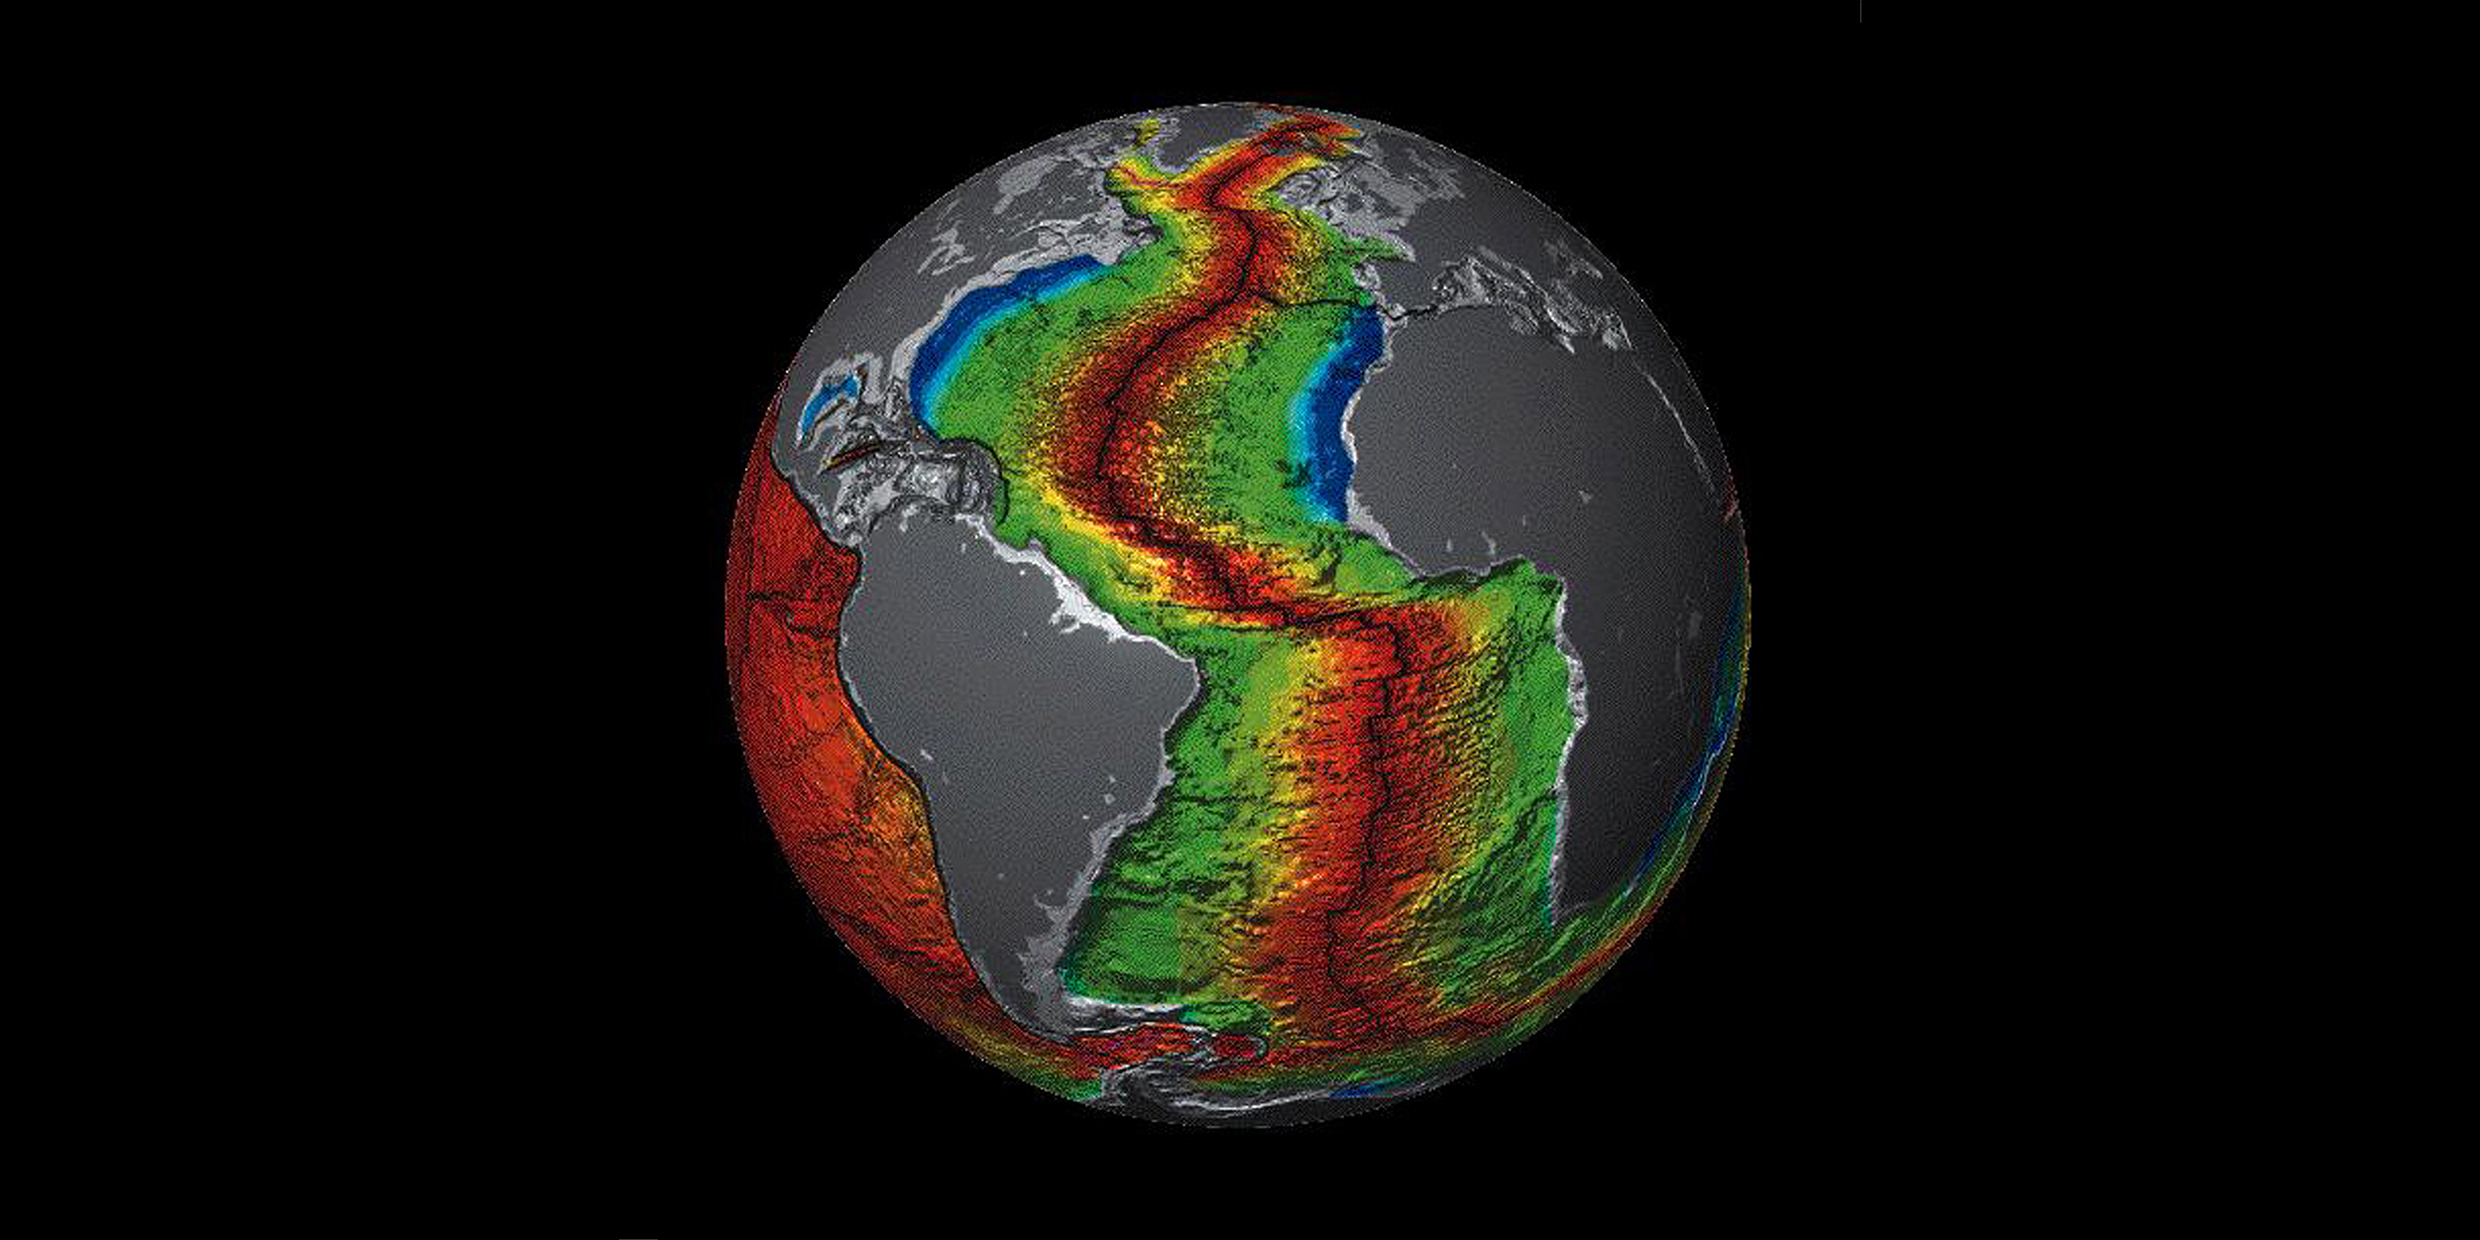 Image of the Earth's tectonic plates